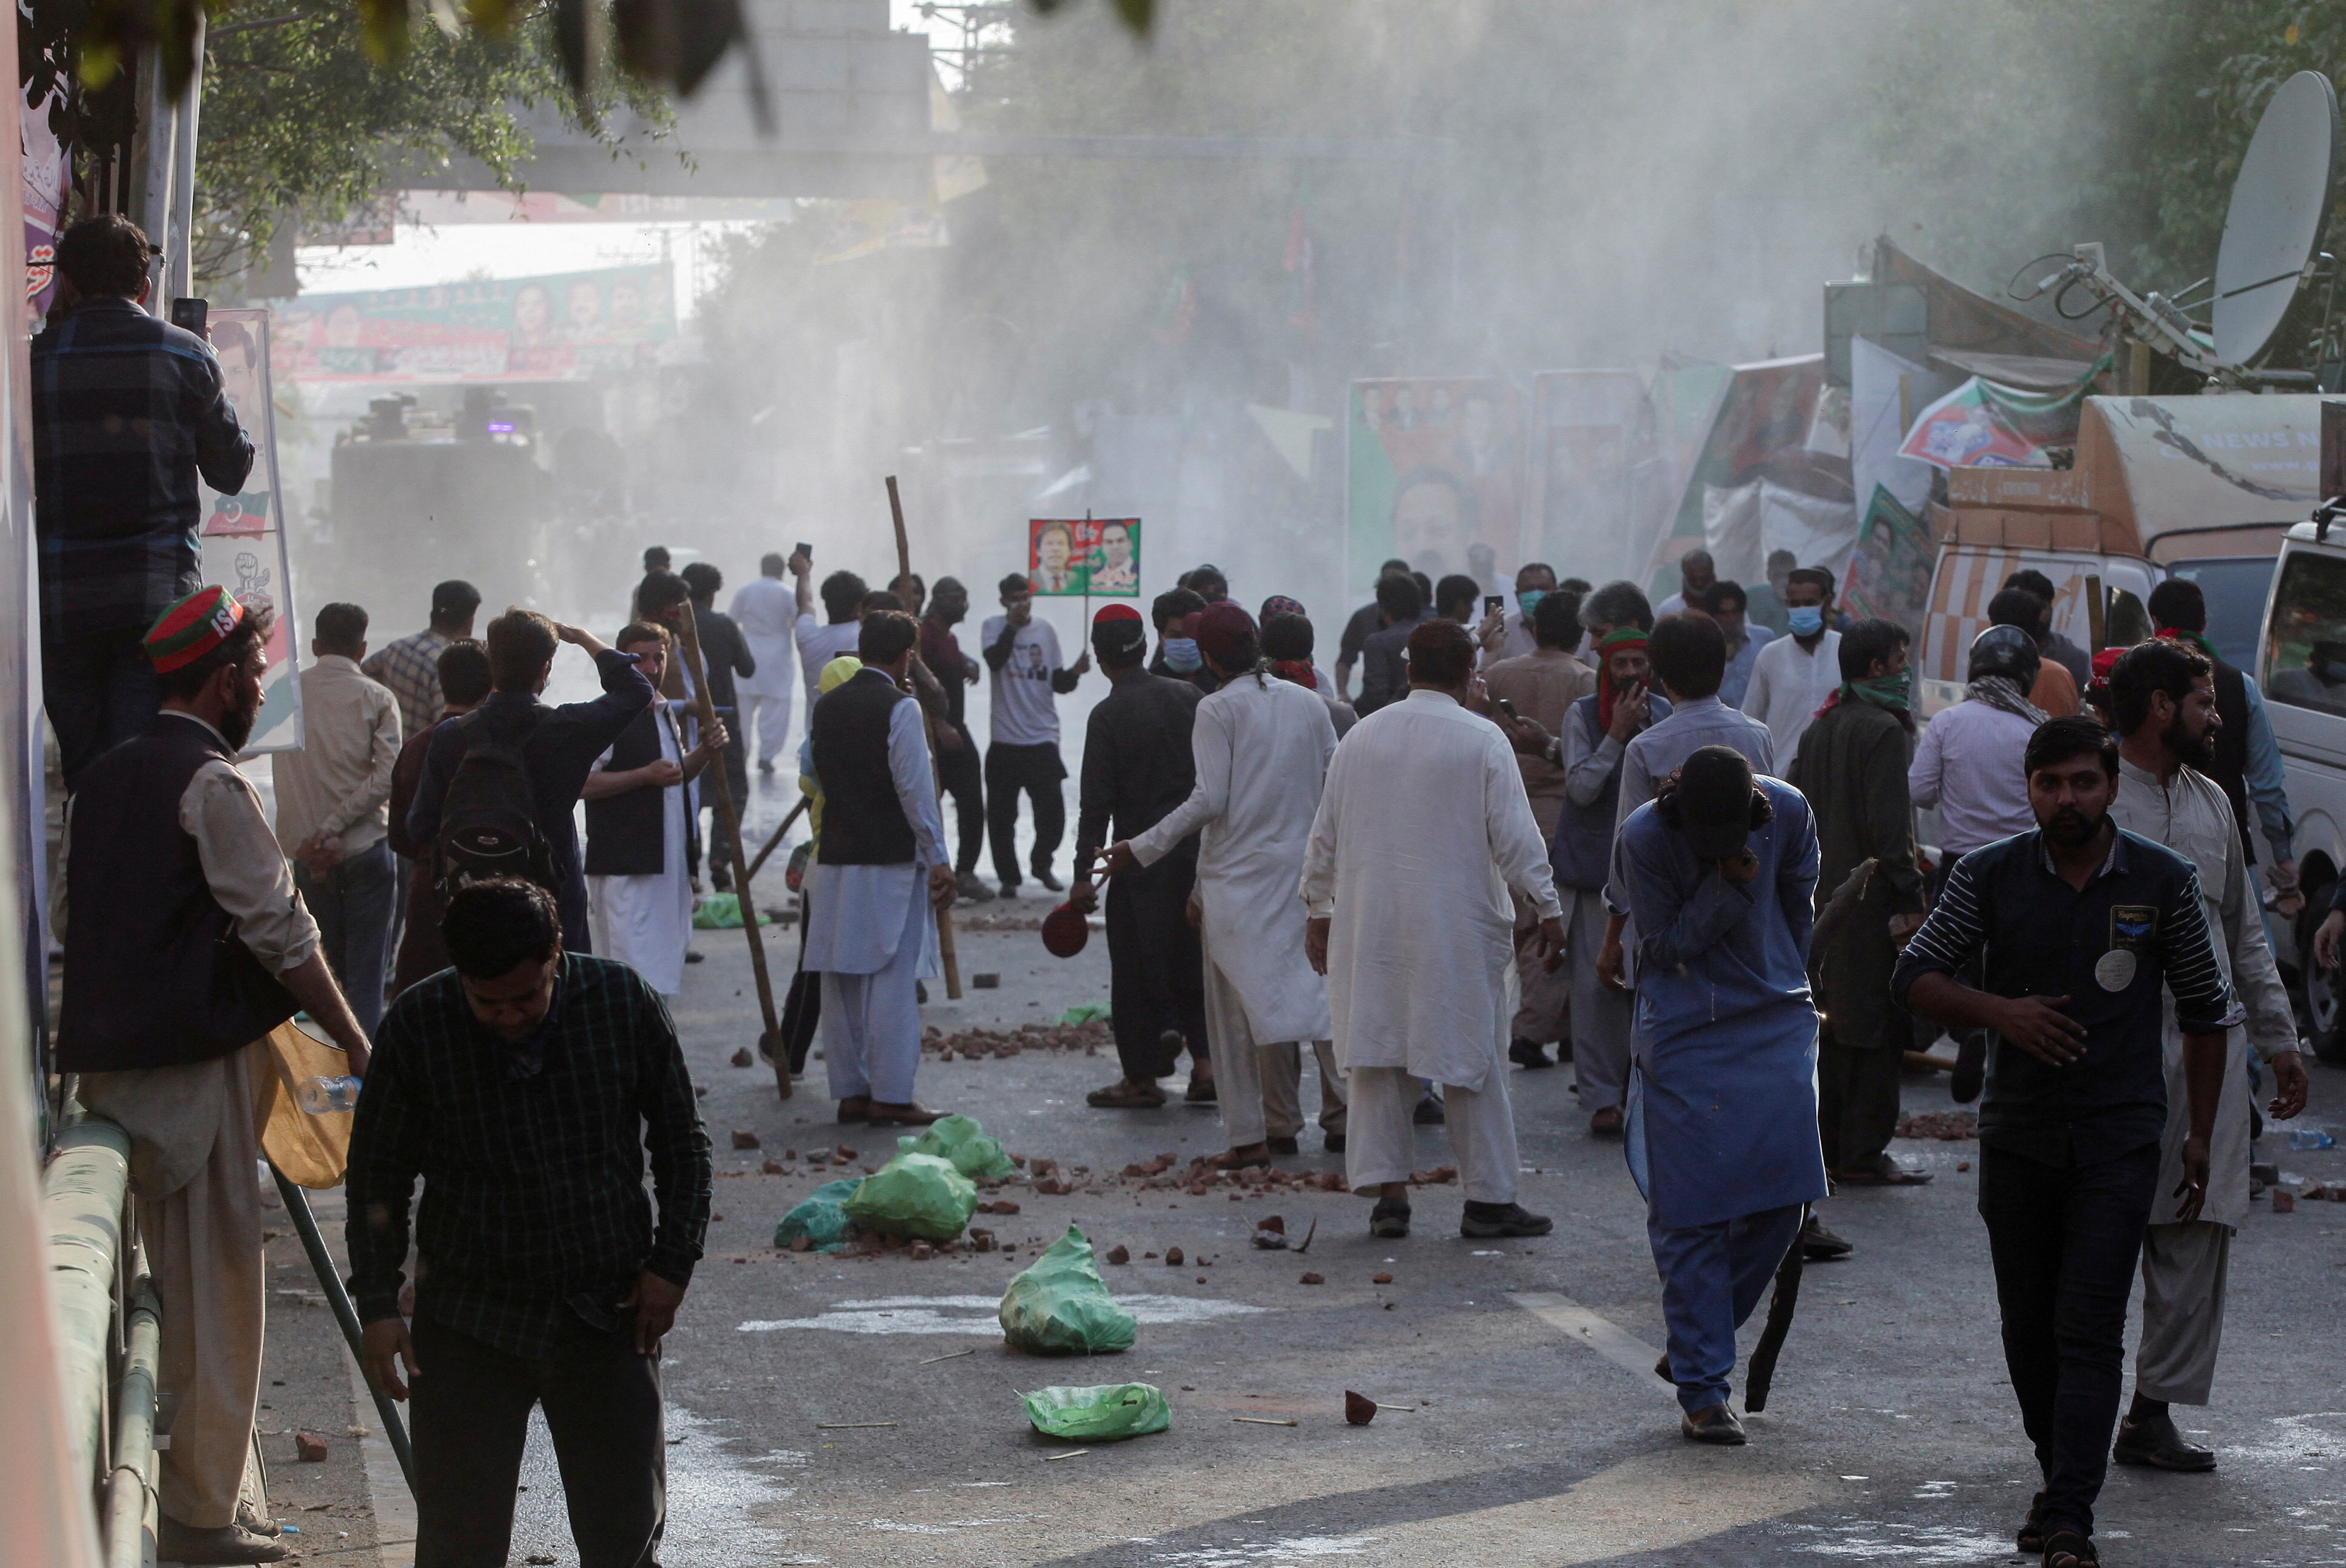 Supporters of former Pakistani PM Khan clashes with police ahead of his possible arrest, in Lahore